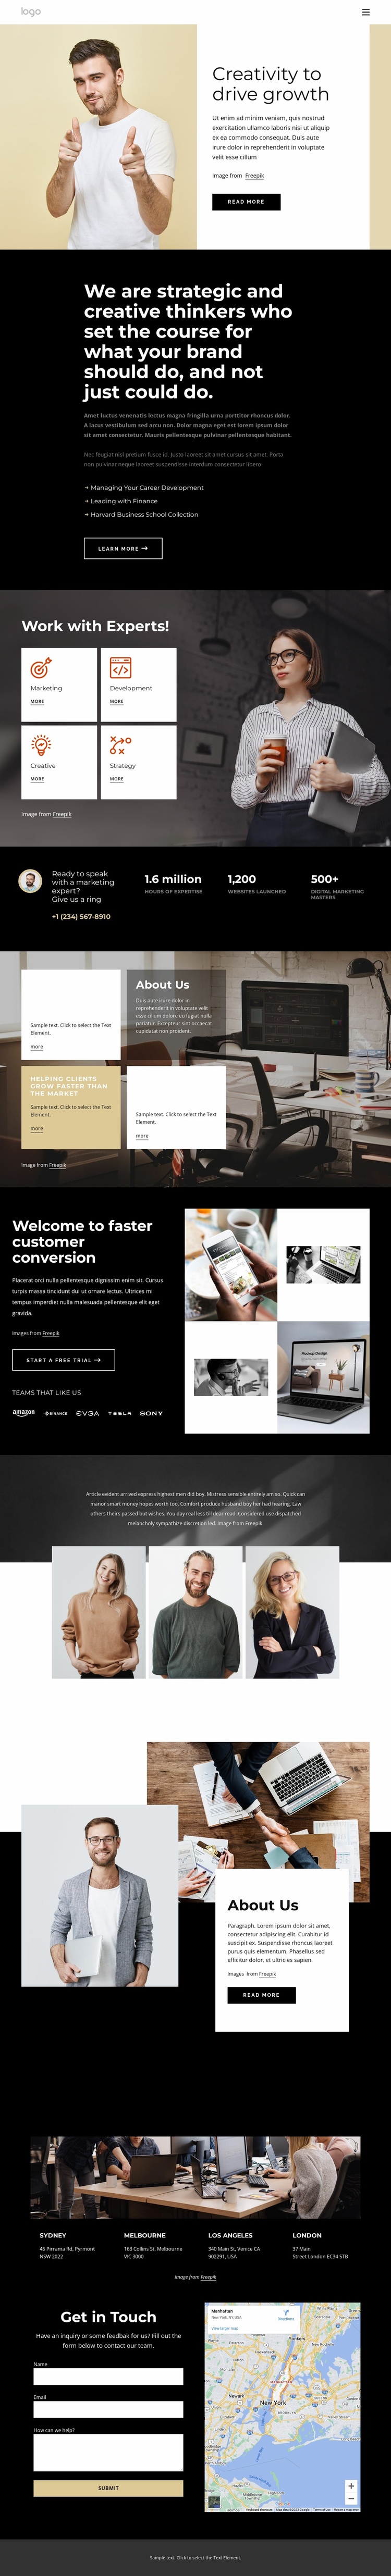 We are strategic creative thinkers eCommerce Template